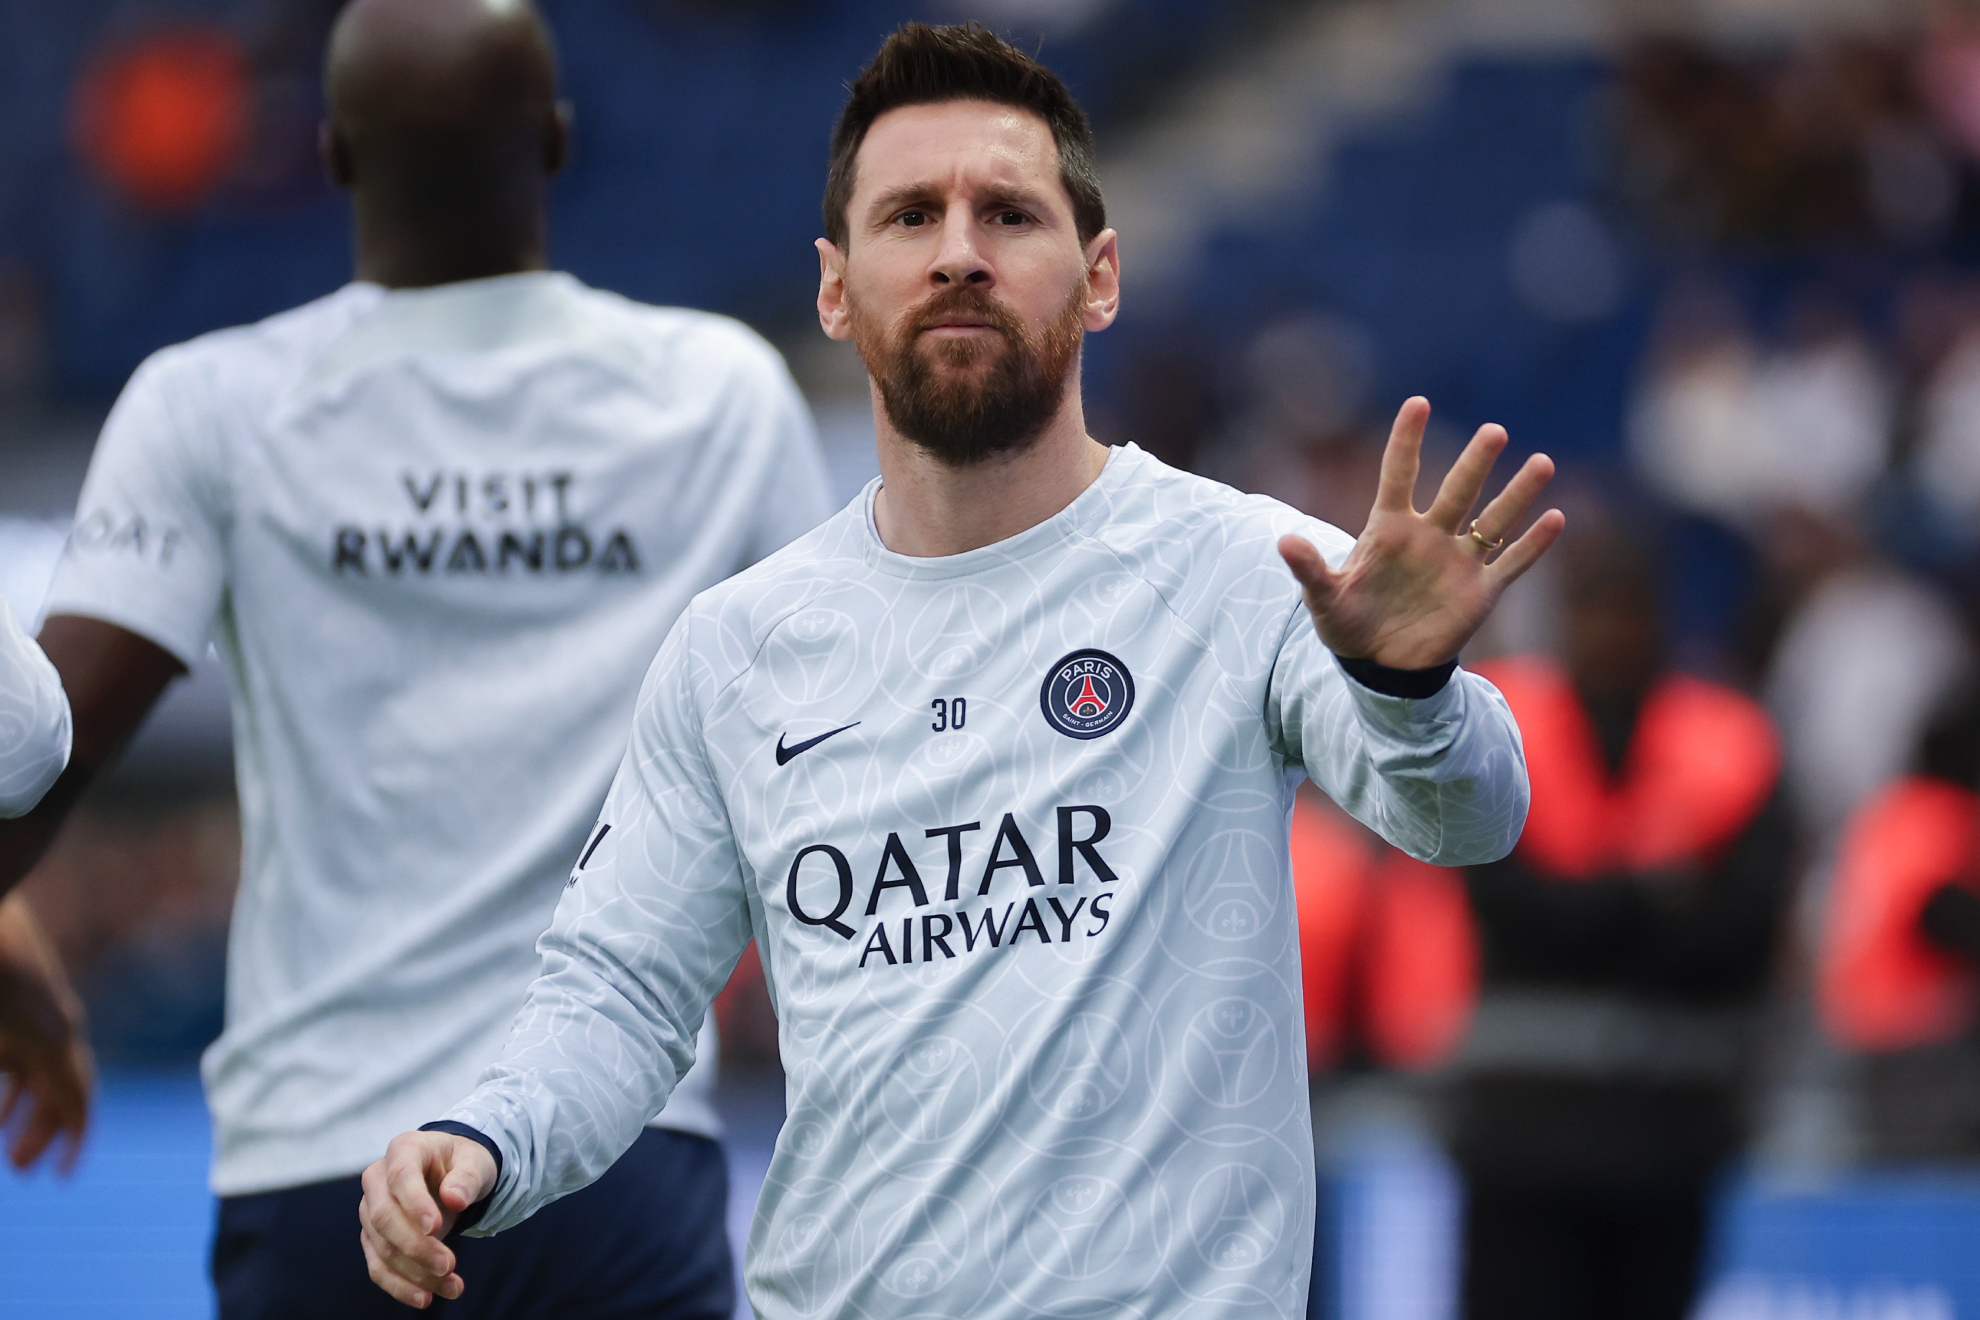 Messi receives a monumental scolding on his return to the Parc des Princes